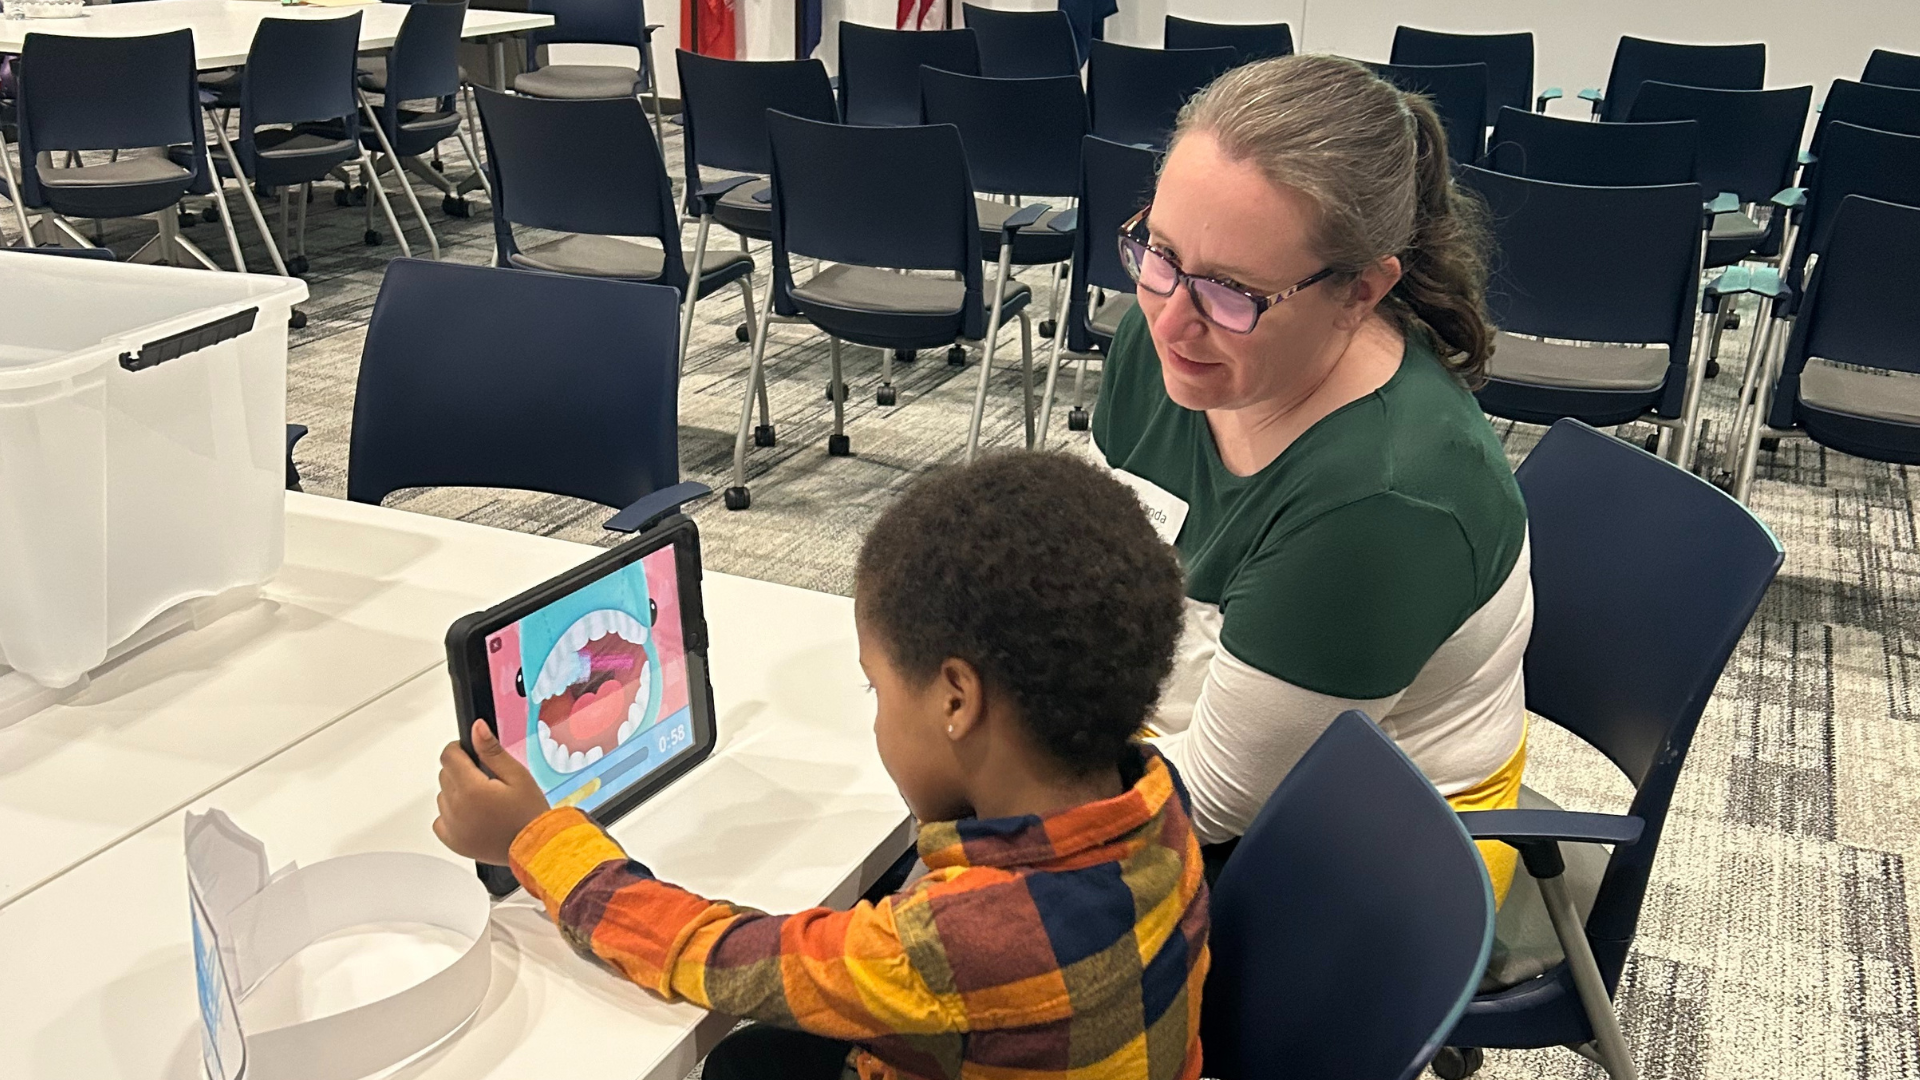 A n adult sitting with a child who is watching an educational video on a tablet